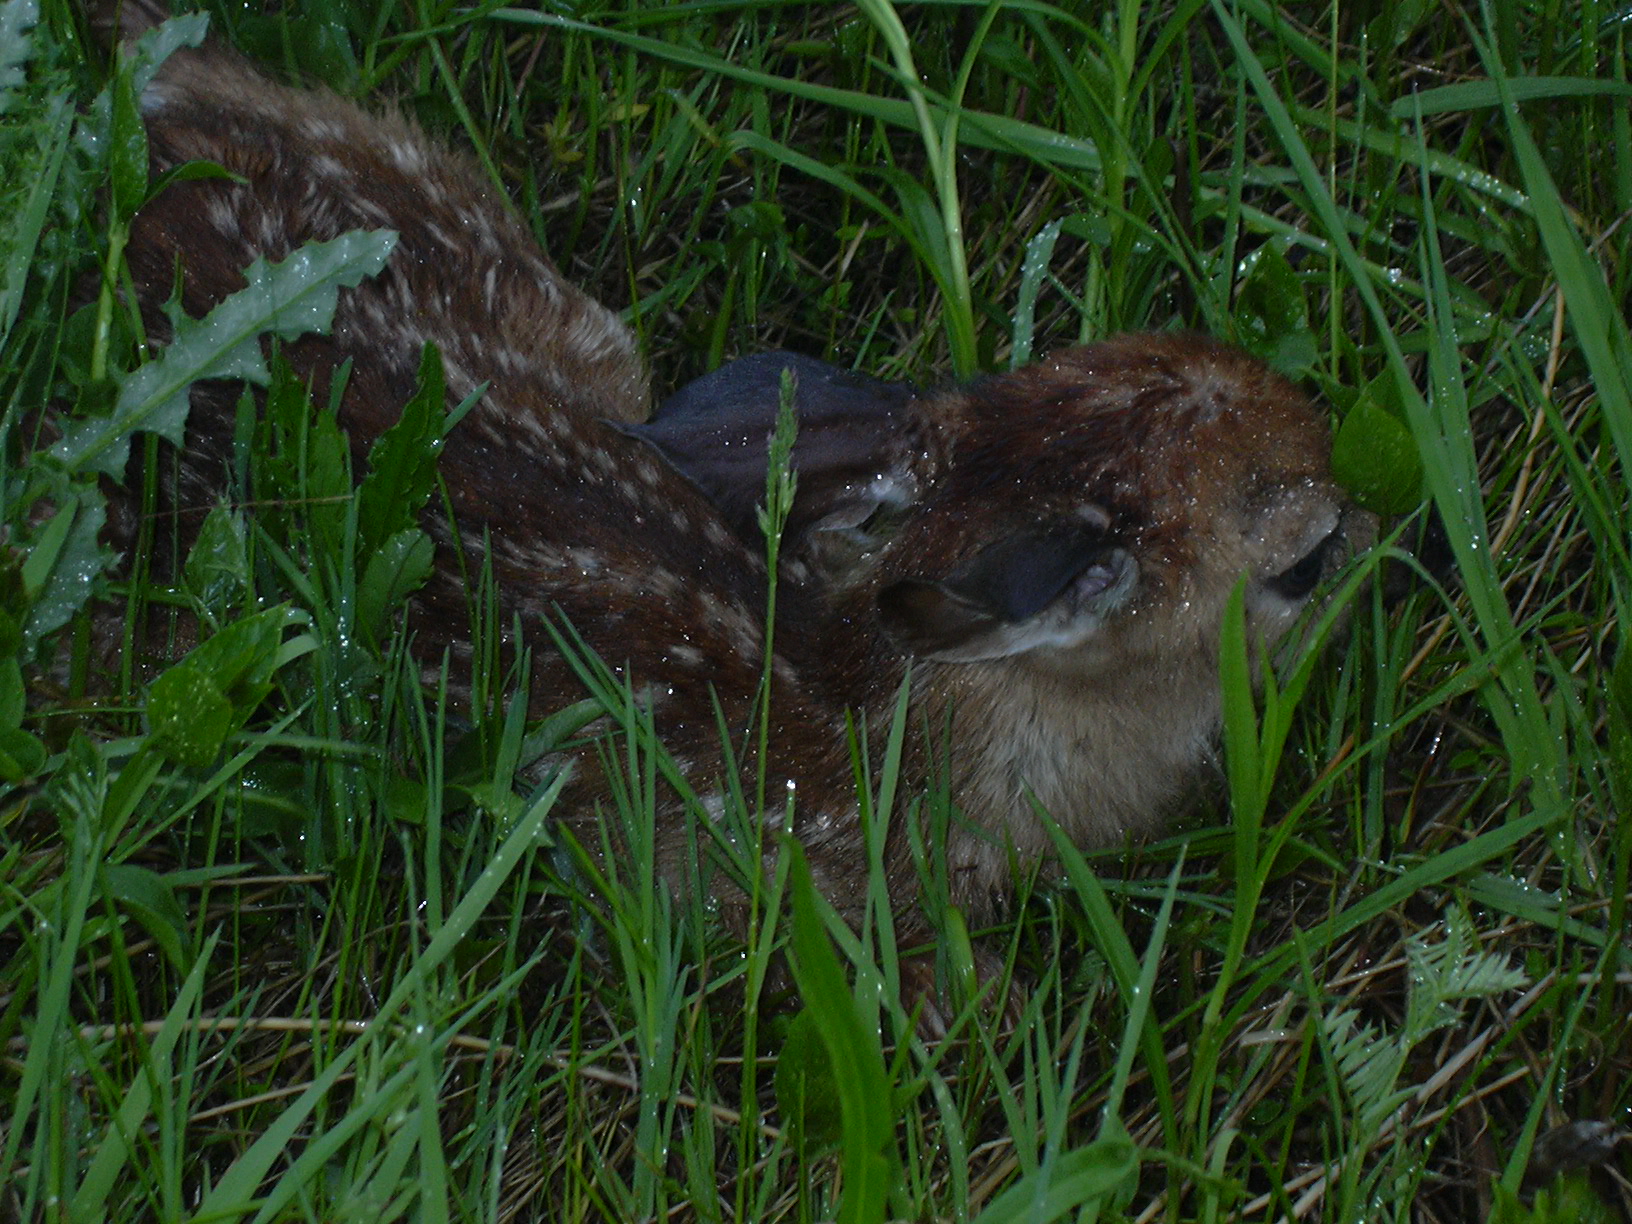 recently born fawn in grass on rainy day